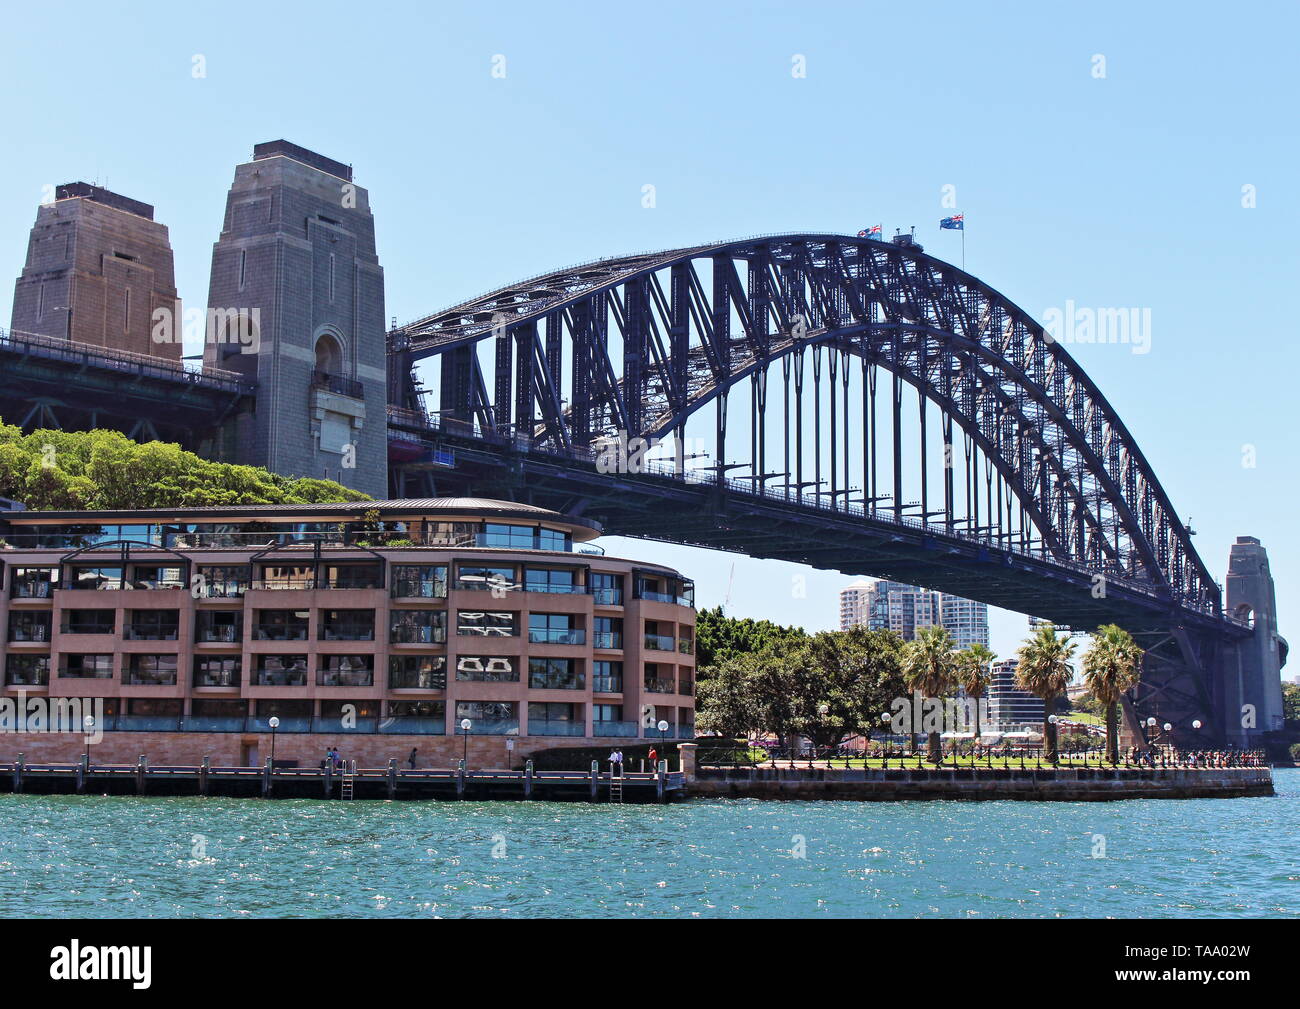 The famous Sydney Harbour Bridge above the Park Hyatt Hotel as captured on a clear day from Campbells Cove in Sydney, NSW Australia Stock Photo